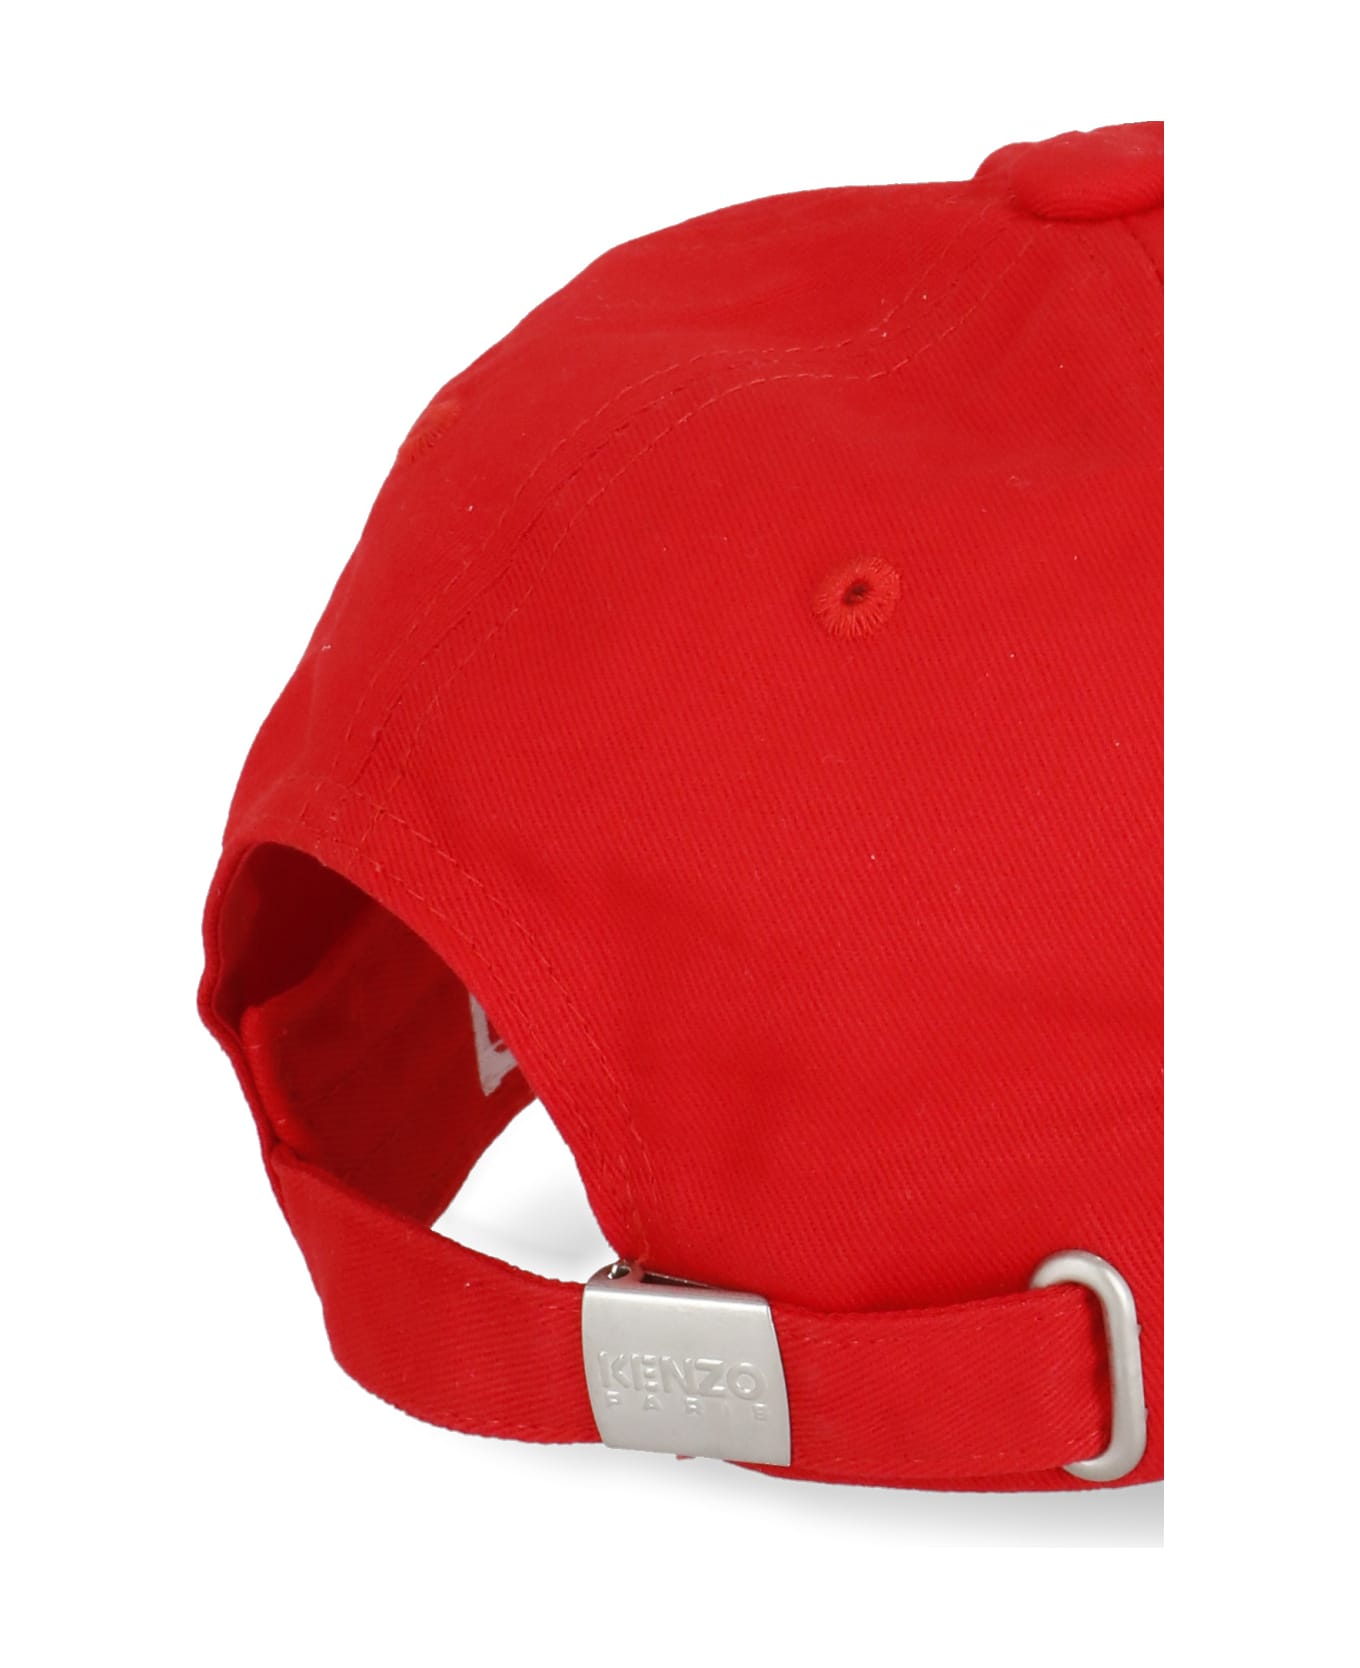 Kenzo Baseball Hat With Logo - Red